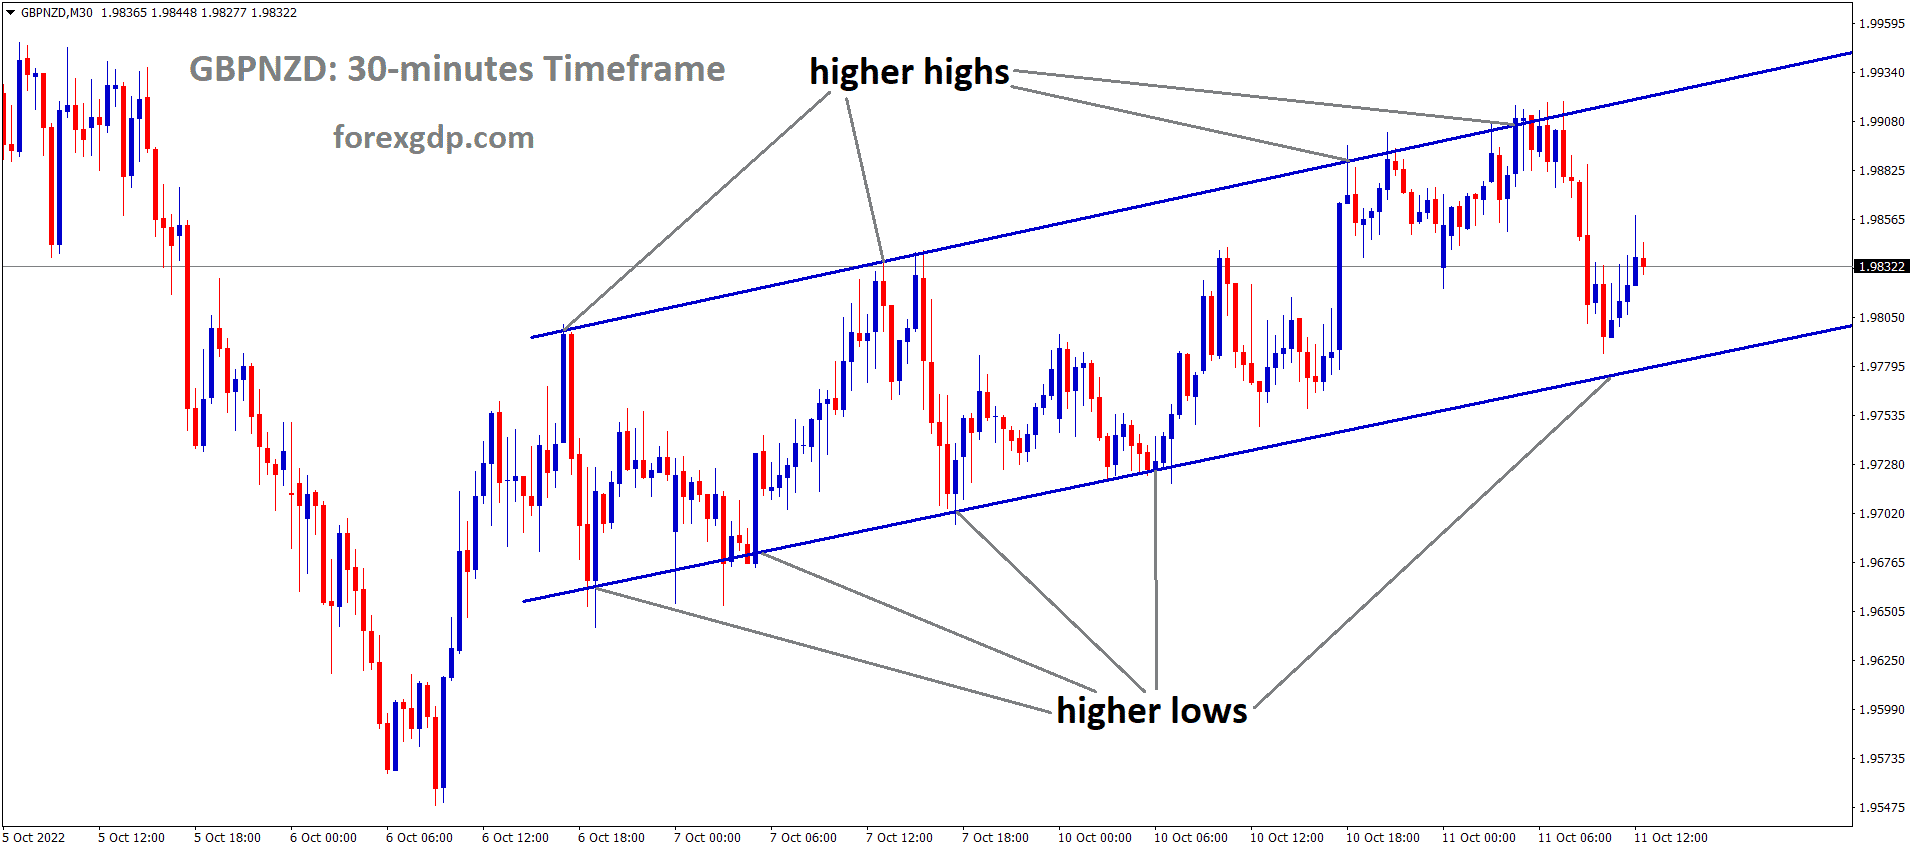 GBPNZD is moving in an Ascending channel and the market has rebounded from the higher low area of the channel 1